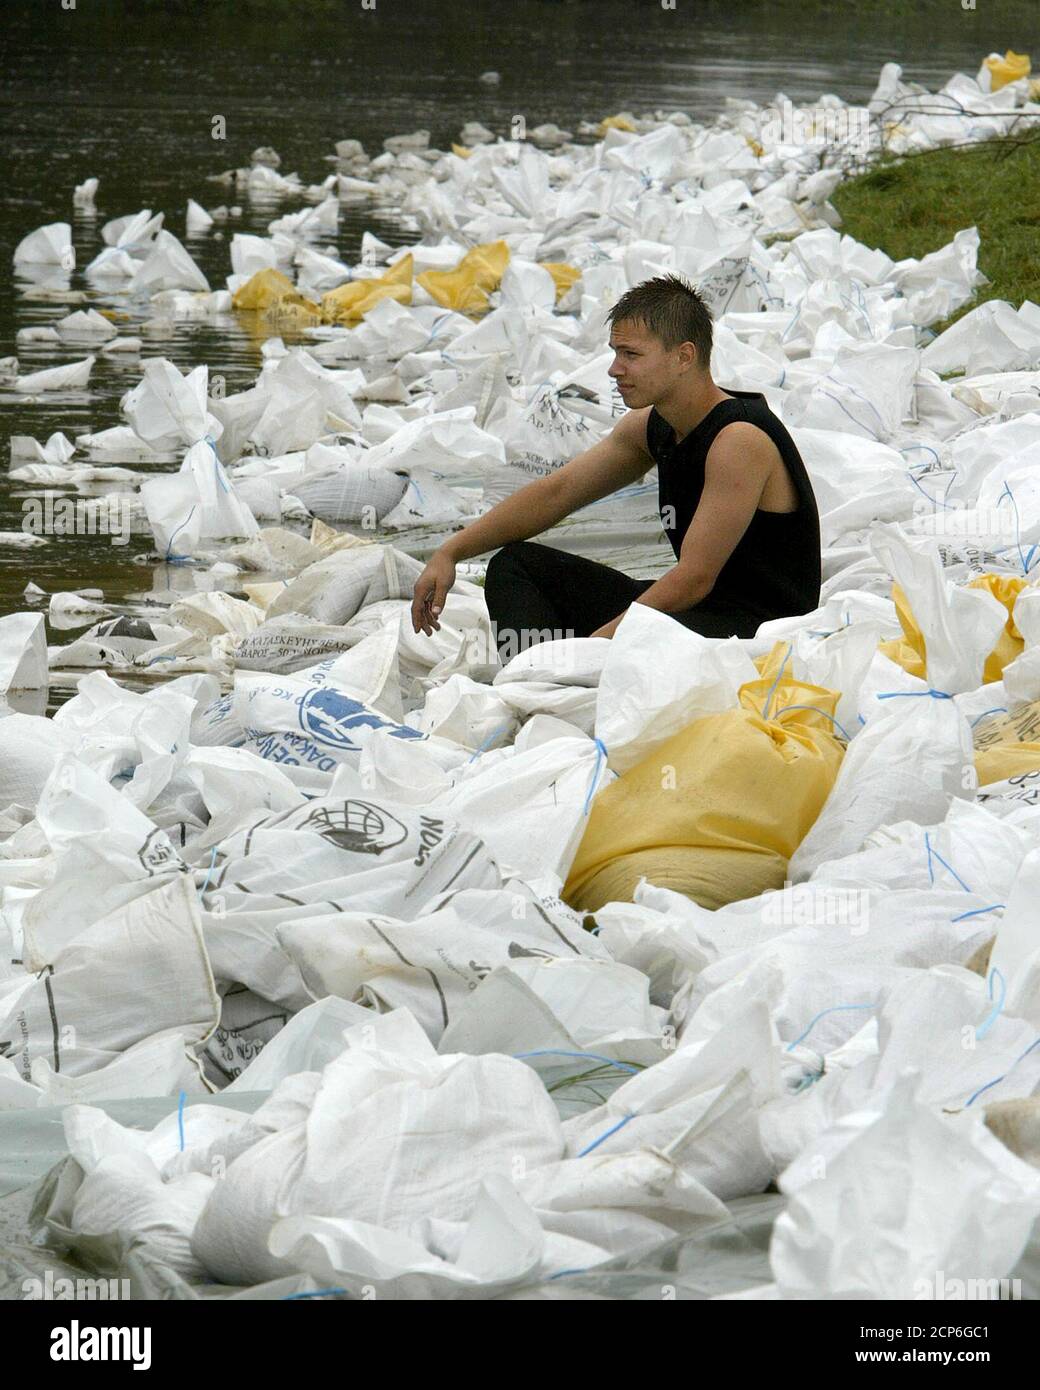 A frogman rests between sand bags reinforcing the dyke on the Jeetzel river in Pisselberg near Dannenberg against flooding from the Elbe river August 25, 2002. The worst floods on record have killed 20 and driven tens of thousands from their homes across eastern Germany, causing a state of emergency to be declared across the region. REUTERS/Christian Charisius REUTERS  CHA/JOH Stock Photo